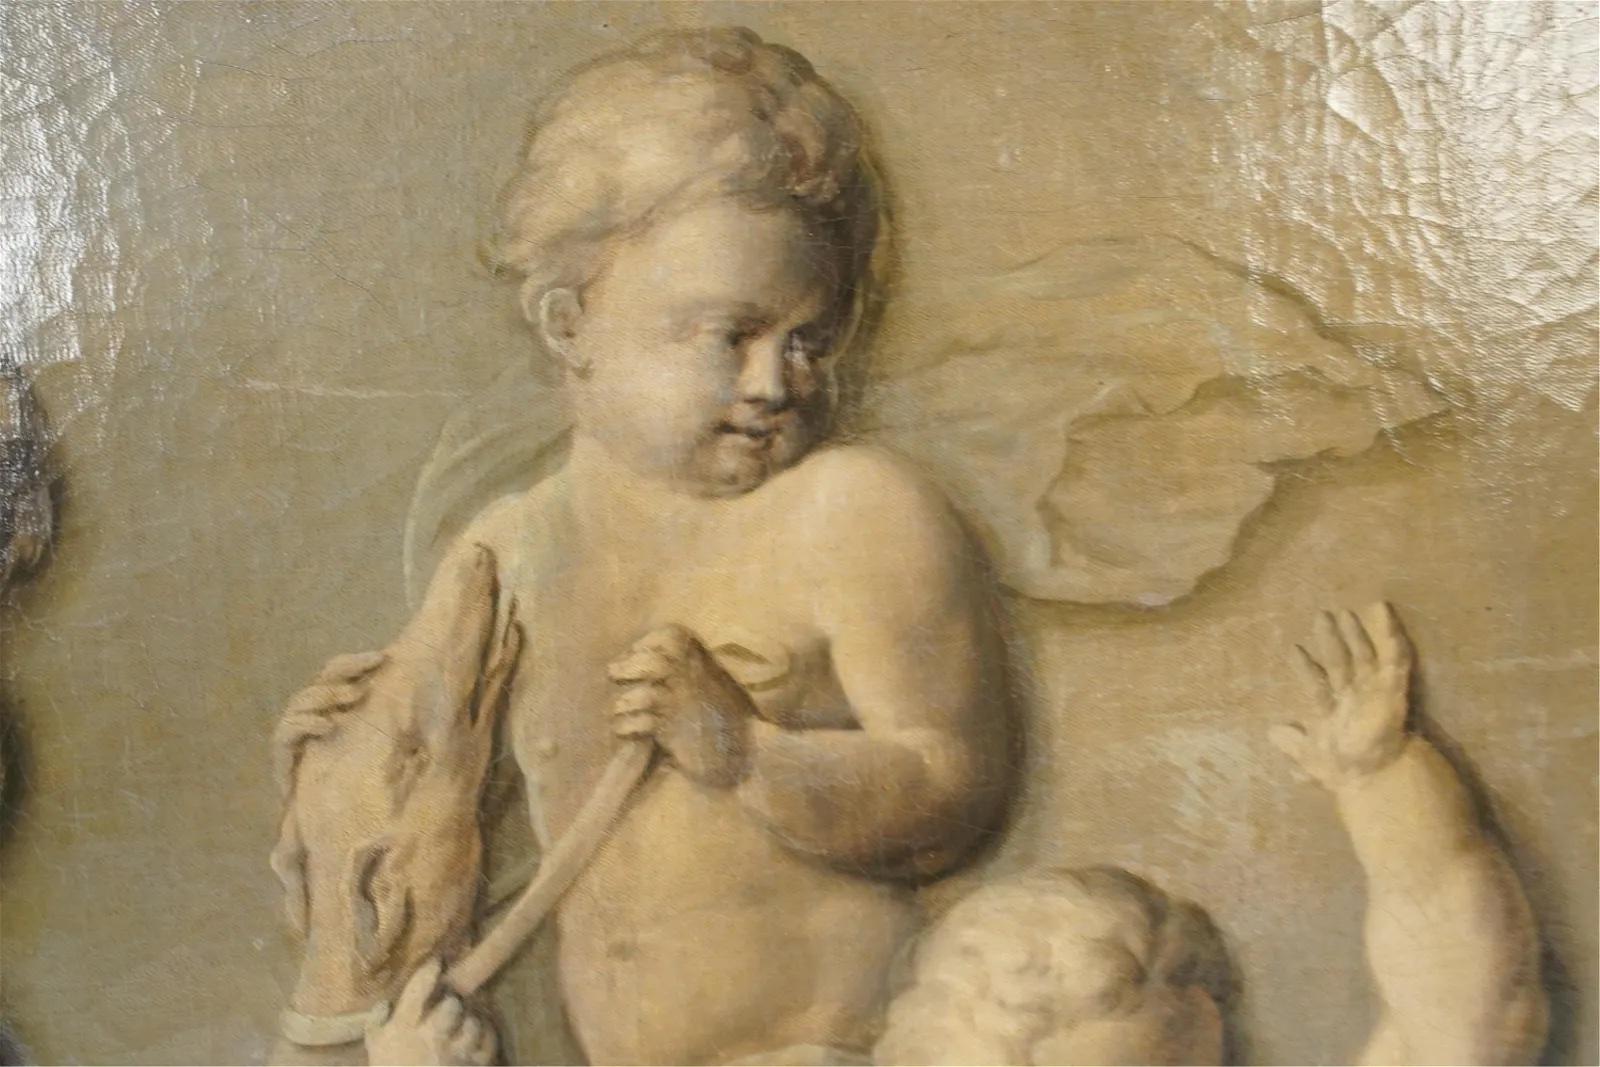 Early 18th Century French Oil on Canvas Grisaille of Putti in a Hunting Scene. Gray-green tones, sculptural looking putti in a landscape with auction stencil on stretcher and auction labels verso. Dimensions: H 40